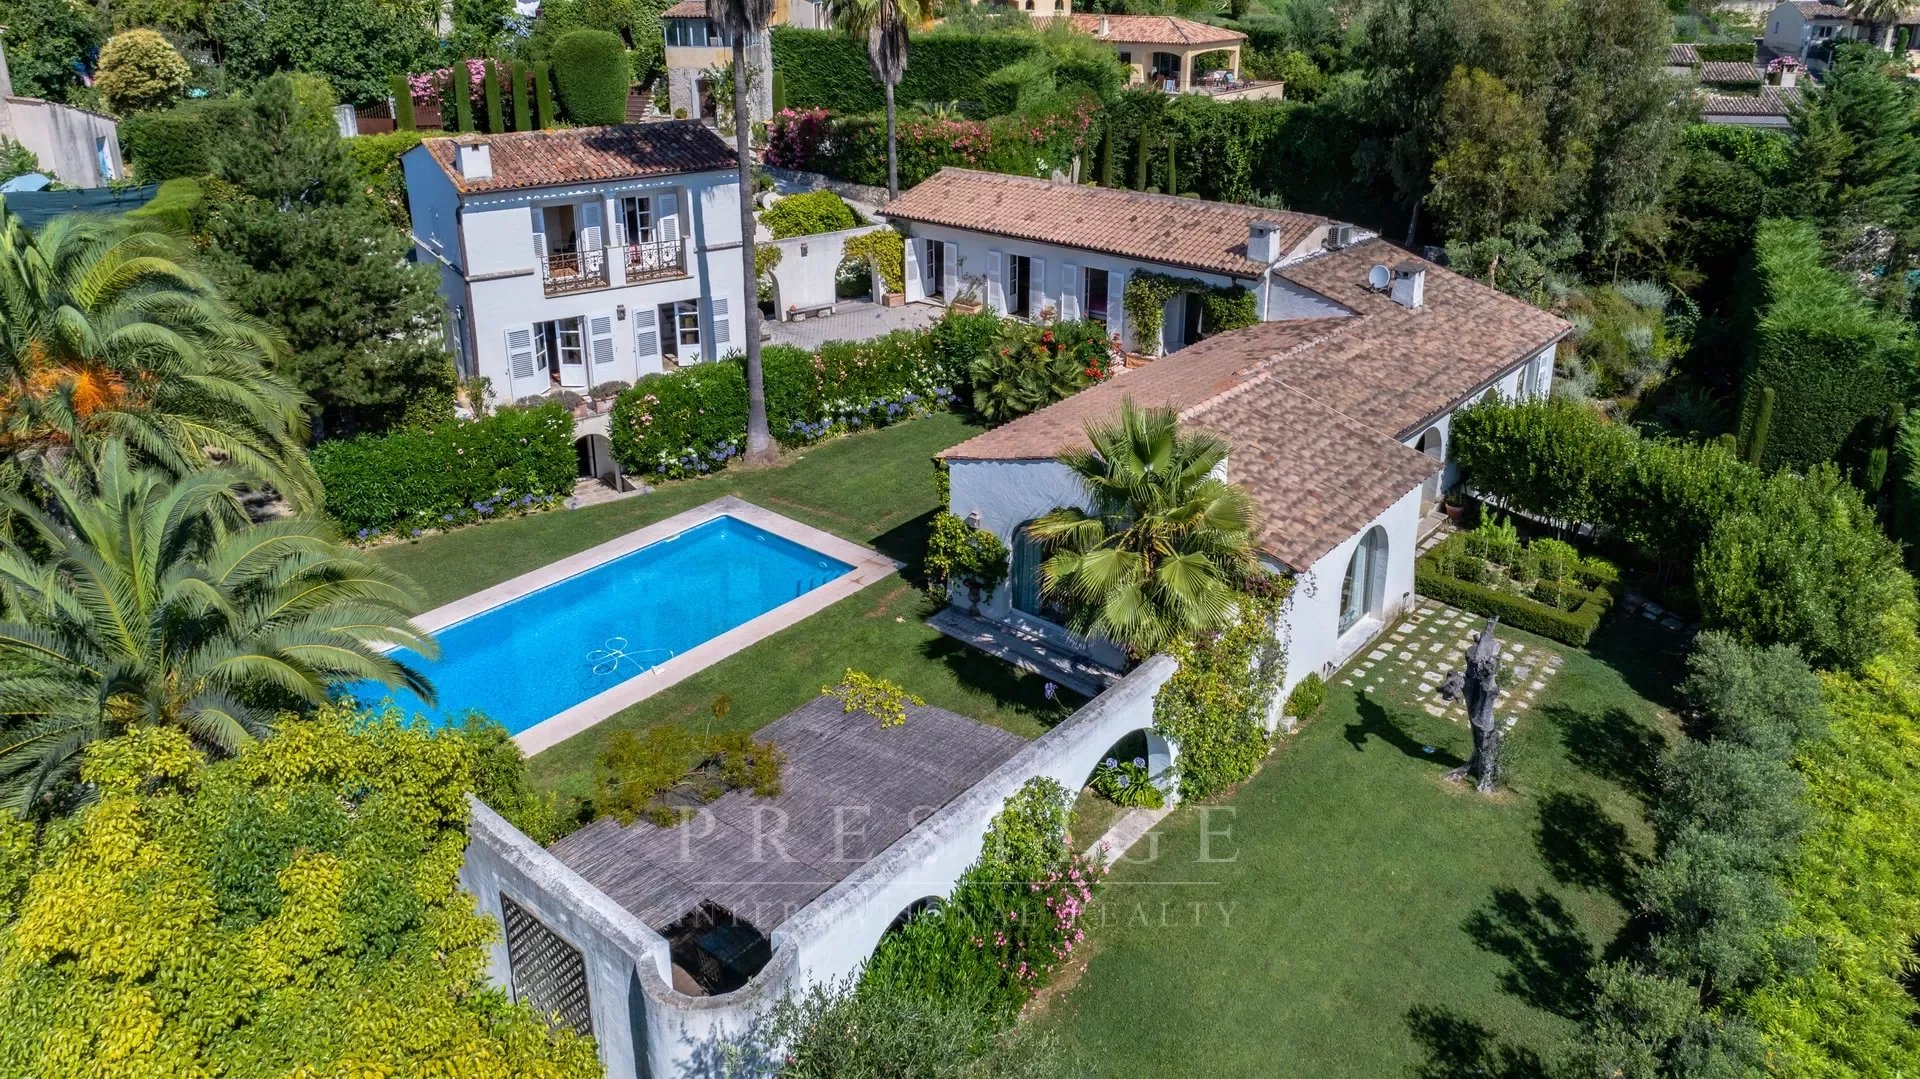 314 sqm property in La Colle-sur-Loup with pool